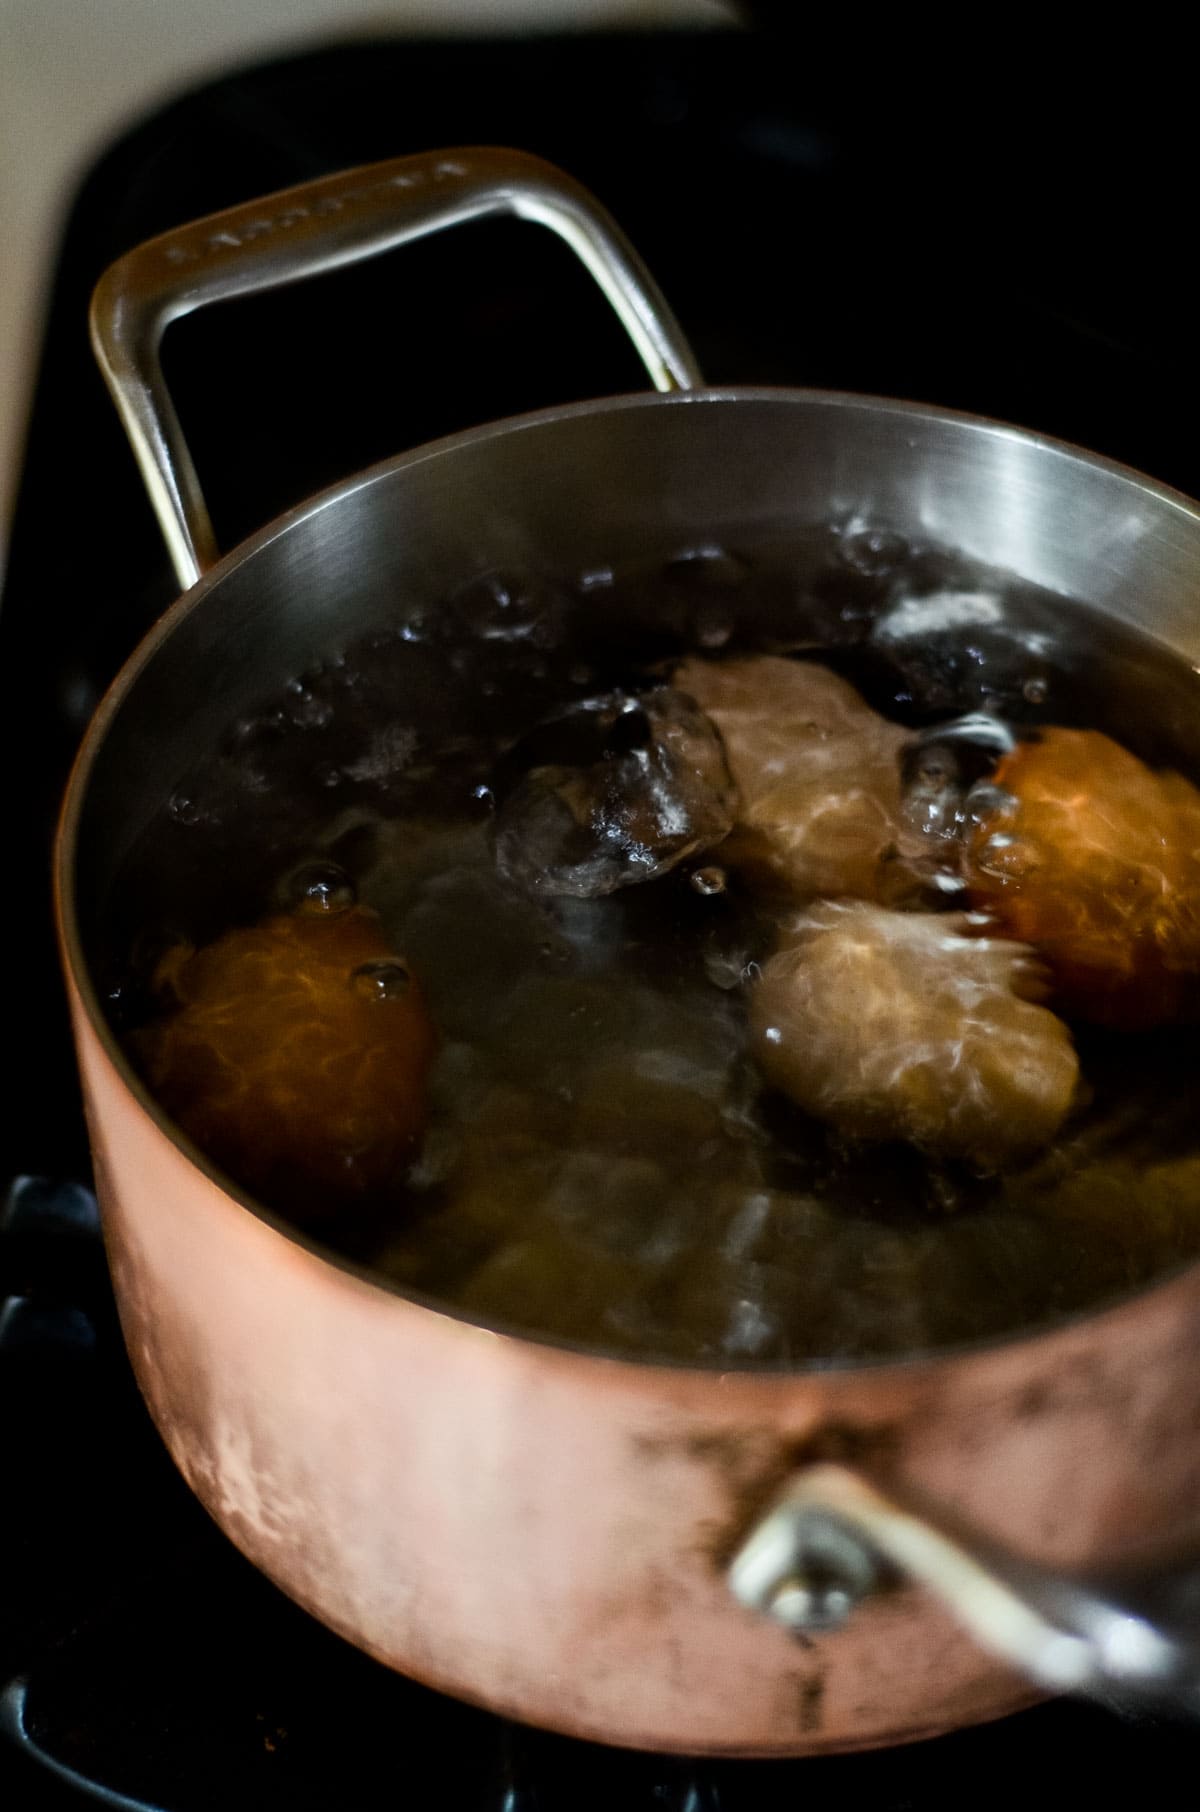 A pot on the stove with boiling water with eggs in the pot.